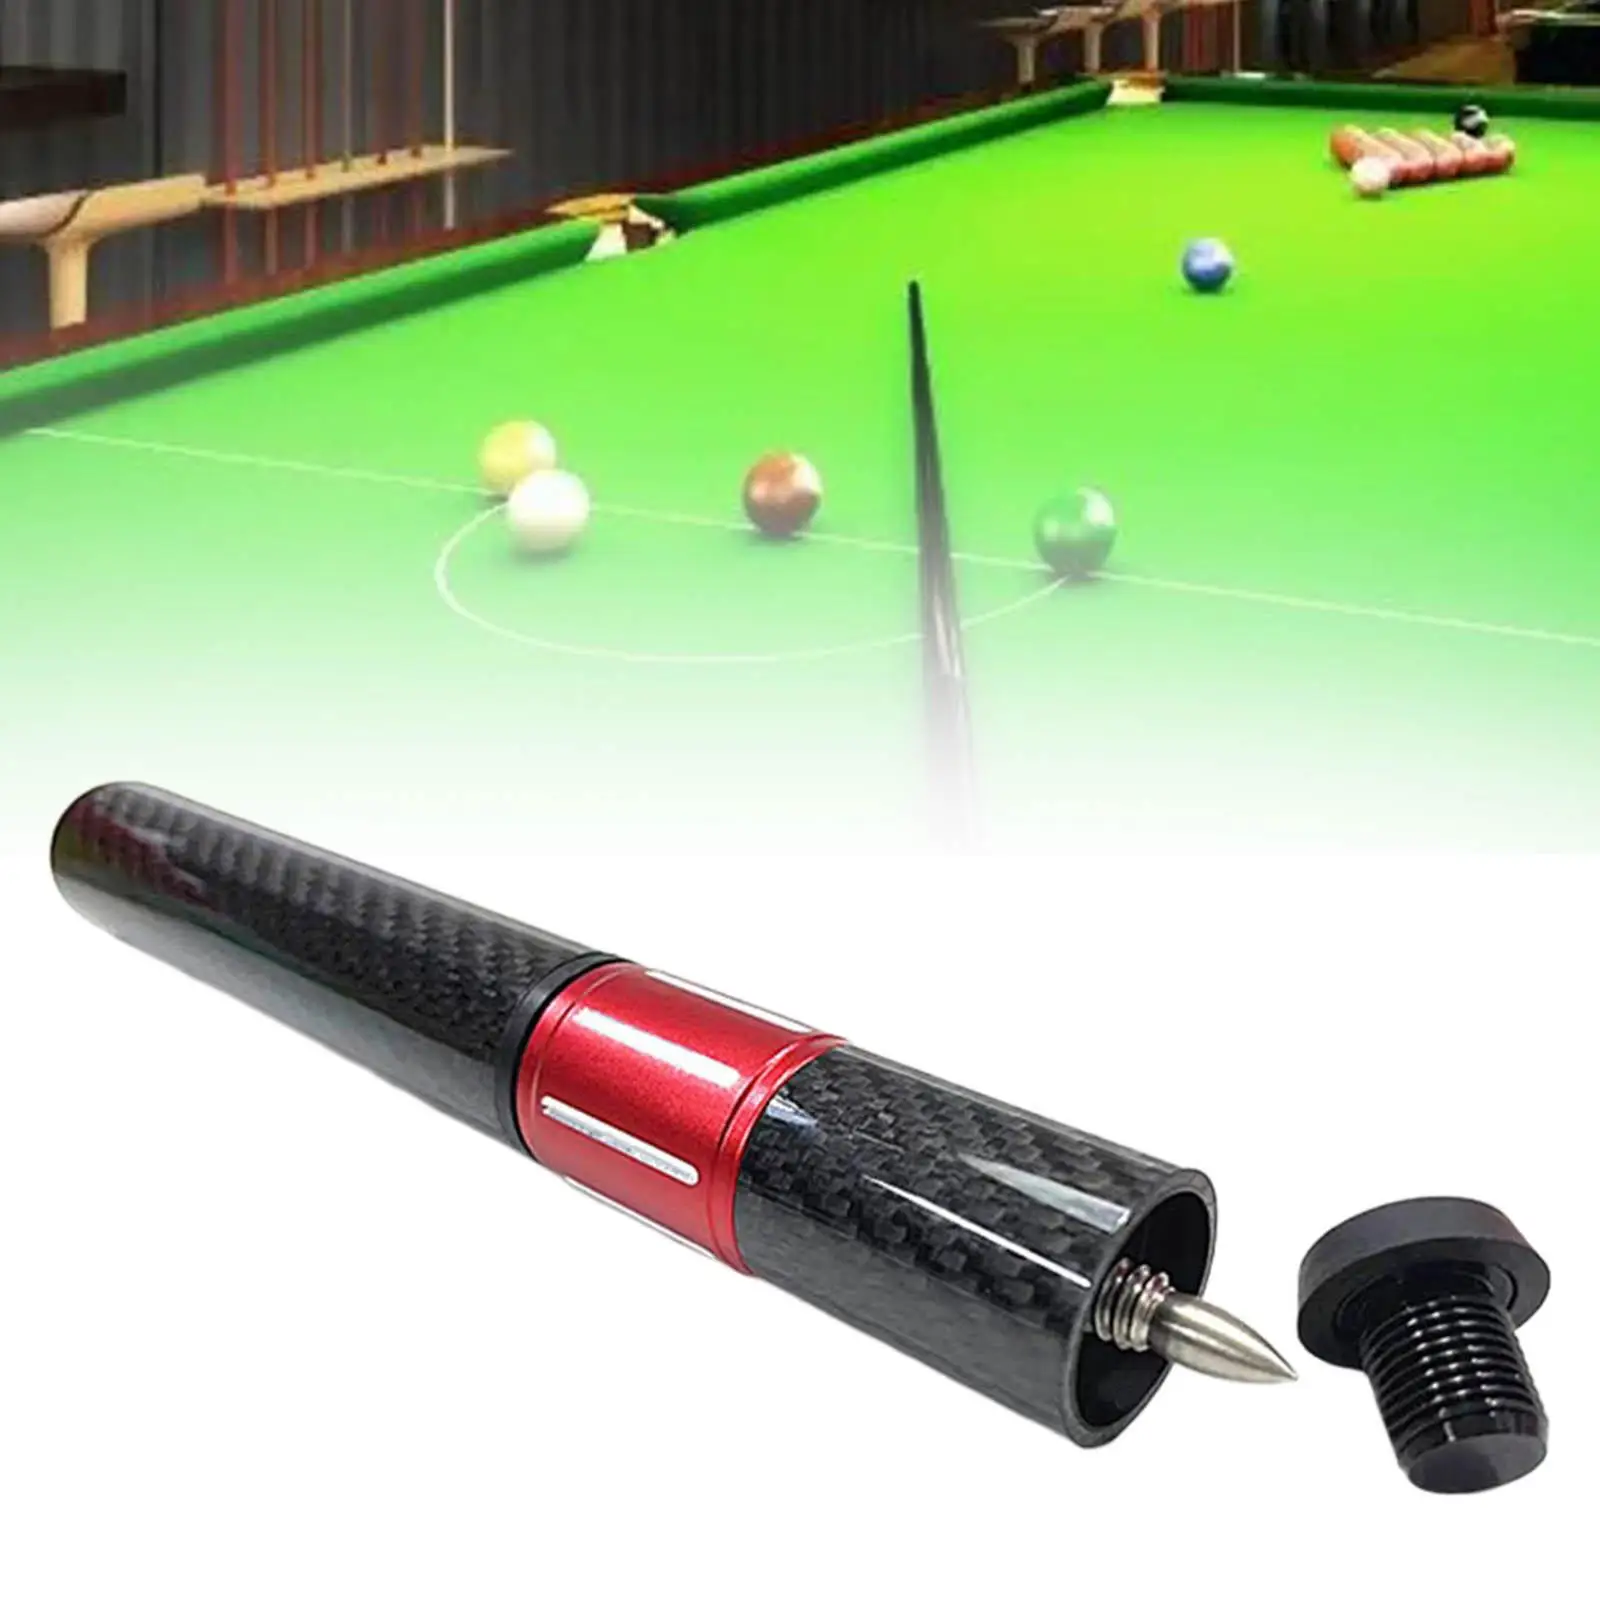 Pool Stick Extension Billiards Pool Cue Extension, Portable Pool Cue Extender, Cue End Extenders for Games Replacement, Kids